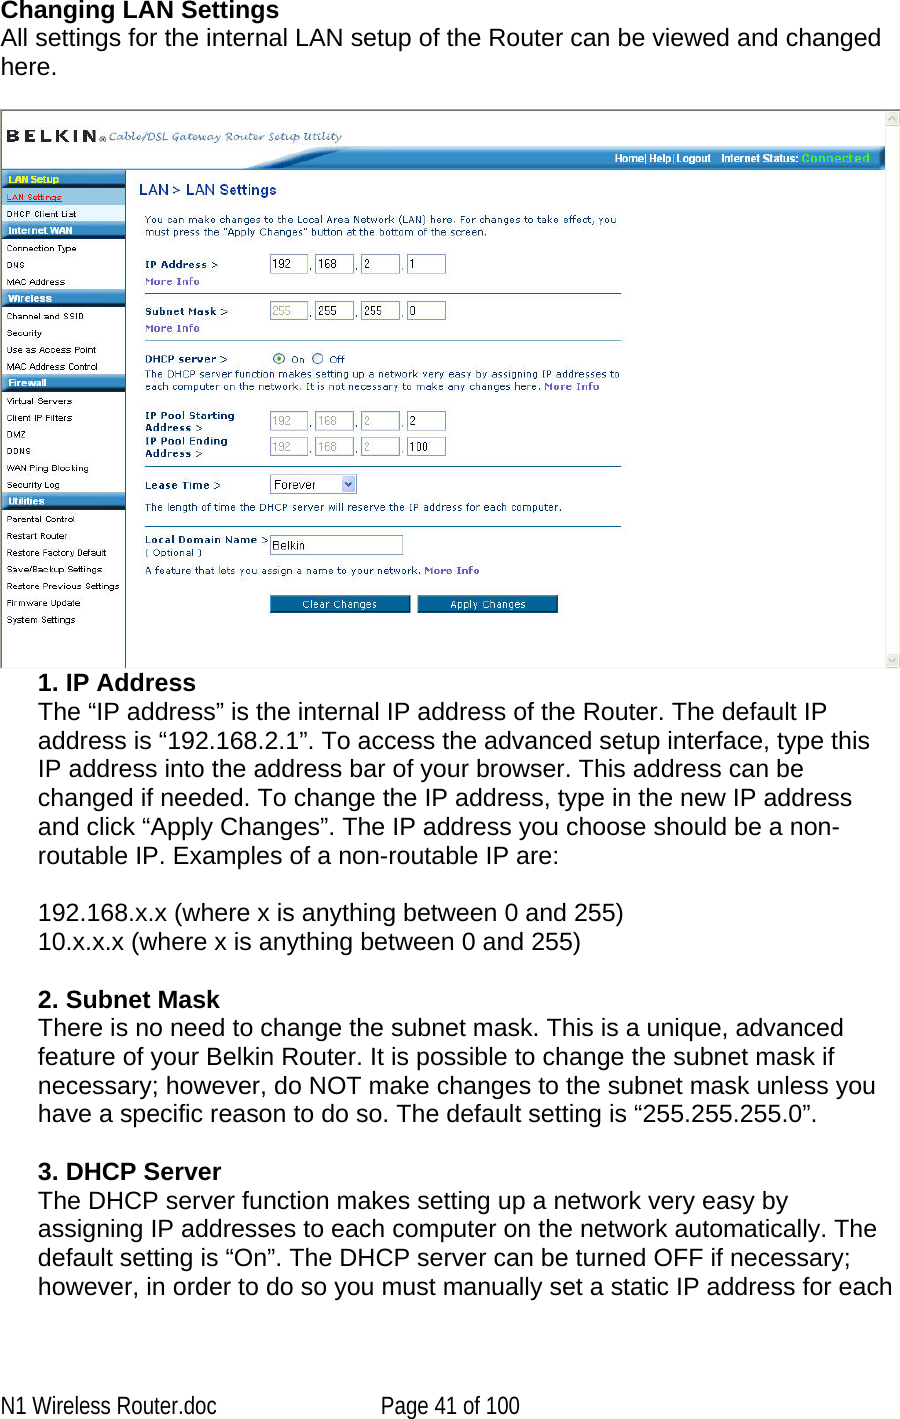   Changing LAN Settings  All settings for the internal LAN setup of the Router can be viewed and changed here.   1. IP Address  The “IP address” is the internal IP address of the Router. The default IP address is “192.168.2.1”. To access the advanced setup interface, type this IP address into the address bar of your browser. This address can be changed if needed. To change the IP address, type in the new IP address and click “Apply Changes”. The IP address you choose should be a non-routable IP. Examples of a non-routable IP are:  192.168.x.x (where x is anything between 0 and 255) 10.x.x.x (where x is anything between 0 and 255)  2. Subnet Mask  There is no need to change the subnet mask. This is a unique, advanced feature of your Belkin Router. It is possible to change the subnet mask if necessary; however, do NOT make changes to the subnet mask unless you have a specific reason to do so. The default setting is “255.255.255.0”.  3. DHCP Server  The DHCP server function makes setting up a network very easy by assigning IP addresses to each computer on the network automatically. The default setting is “On”. The DHCP server can be turned OFF if necessary; however, in order to do so you must manually set a static IP address for each N1 Wireless Router.doc  Page 41 of 100 